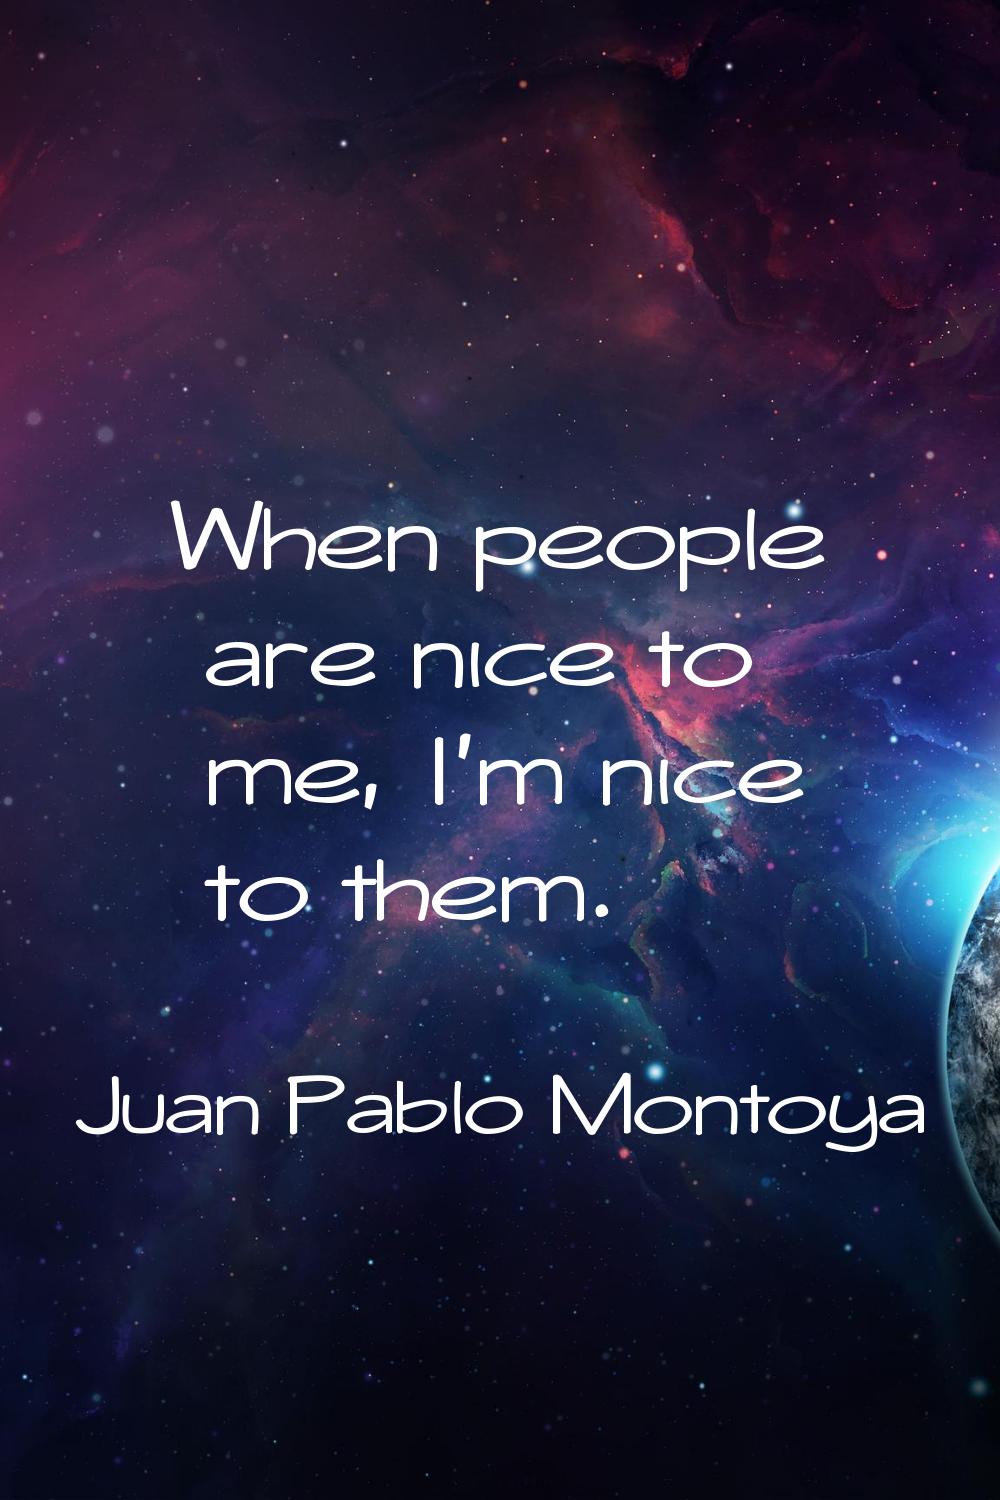 When people are nice to me, I'm nice to them.